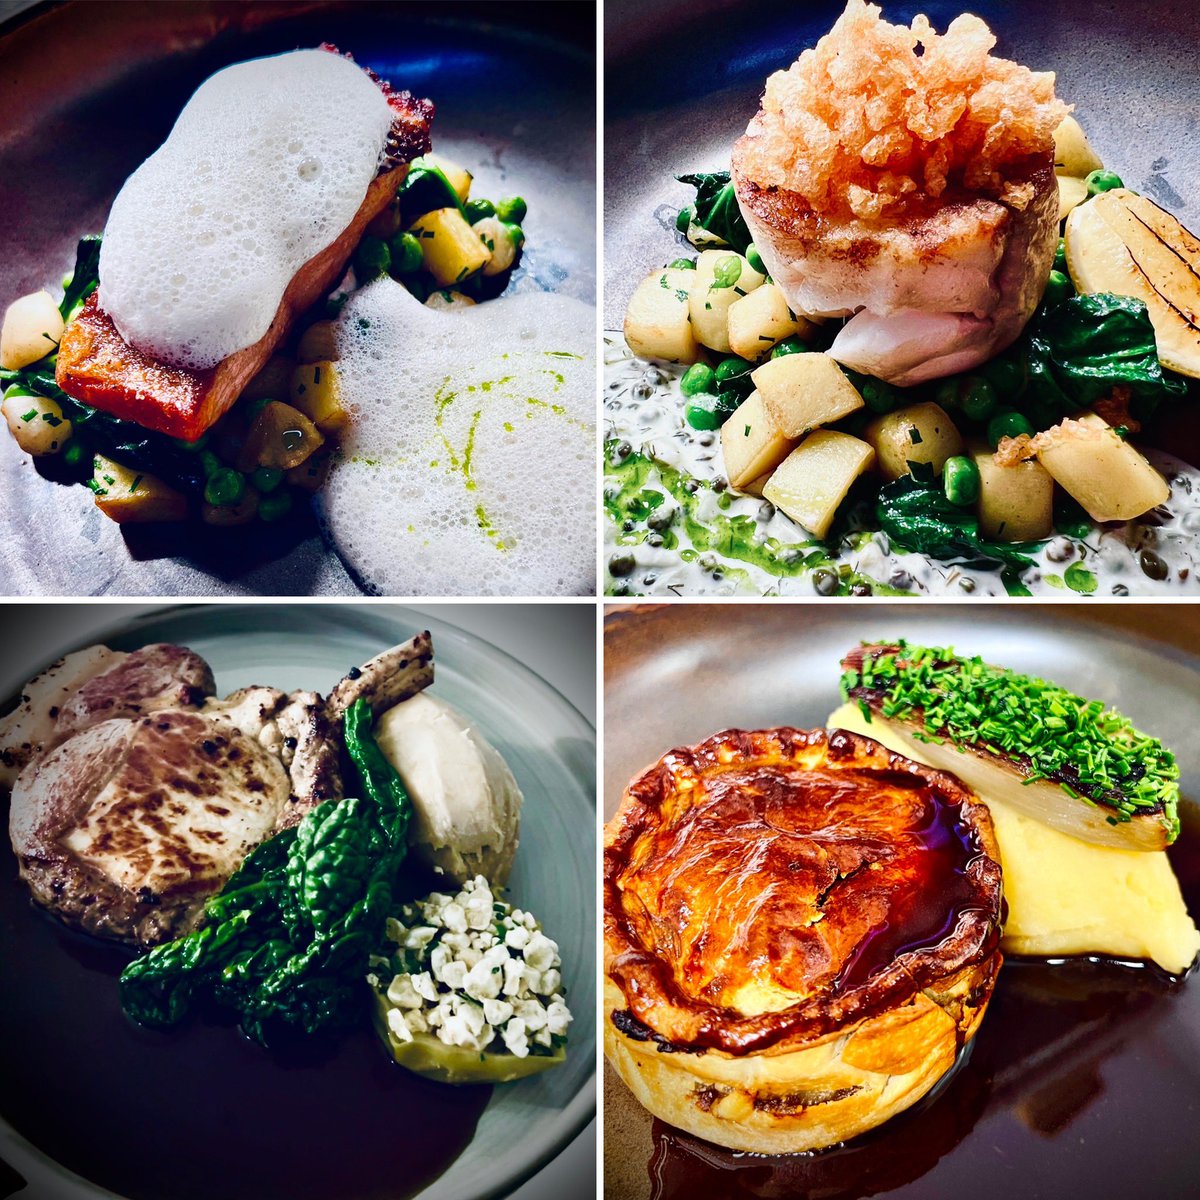 Couple of kitchen photos today @QueensKirkby New menu launched and we are away……. #LincsConnect #aarosette